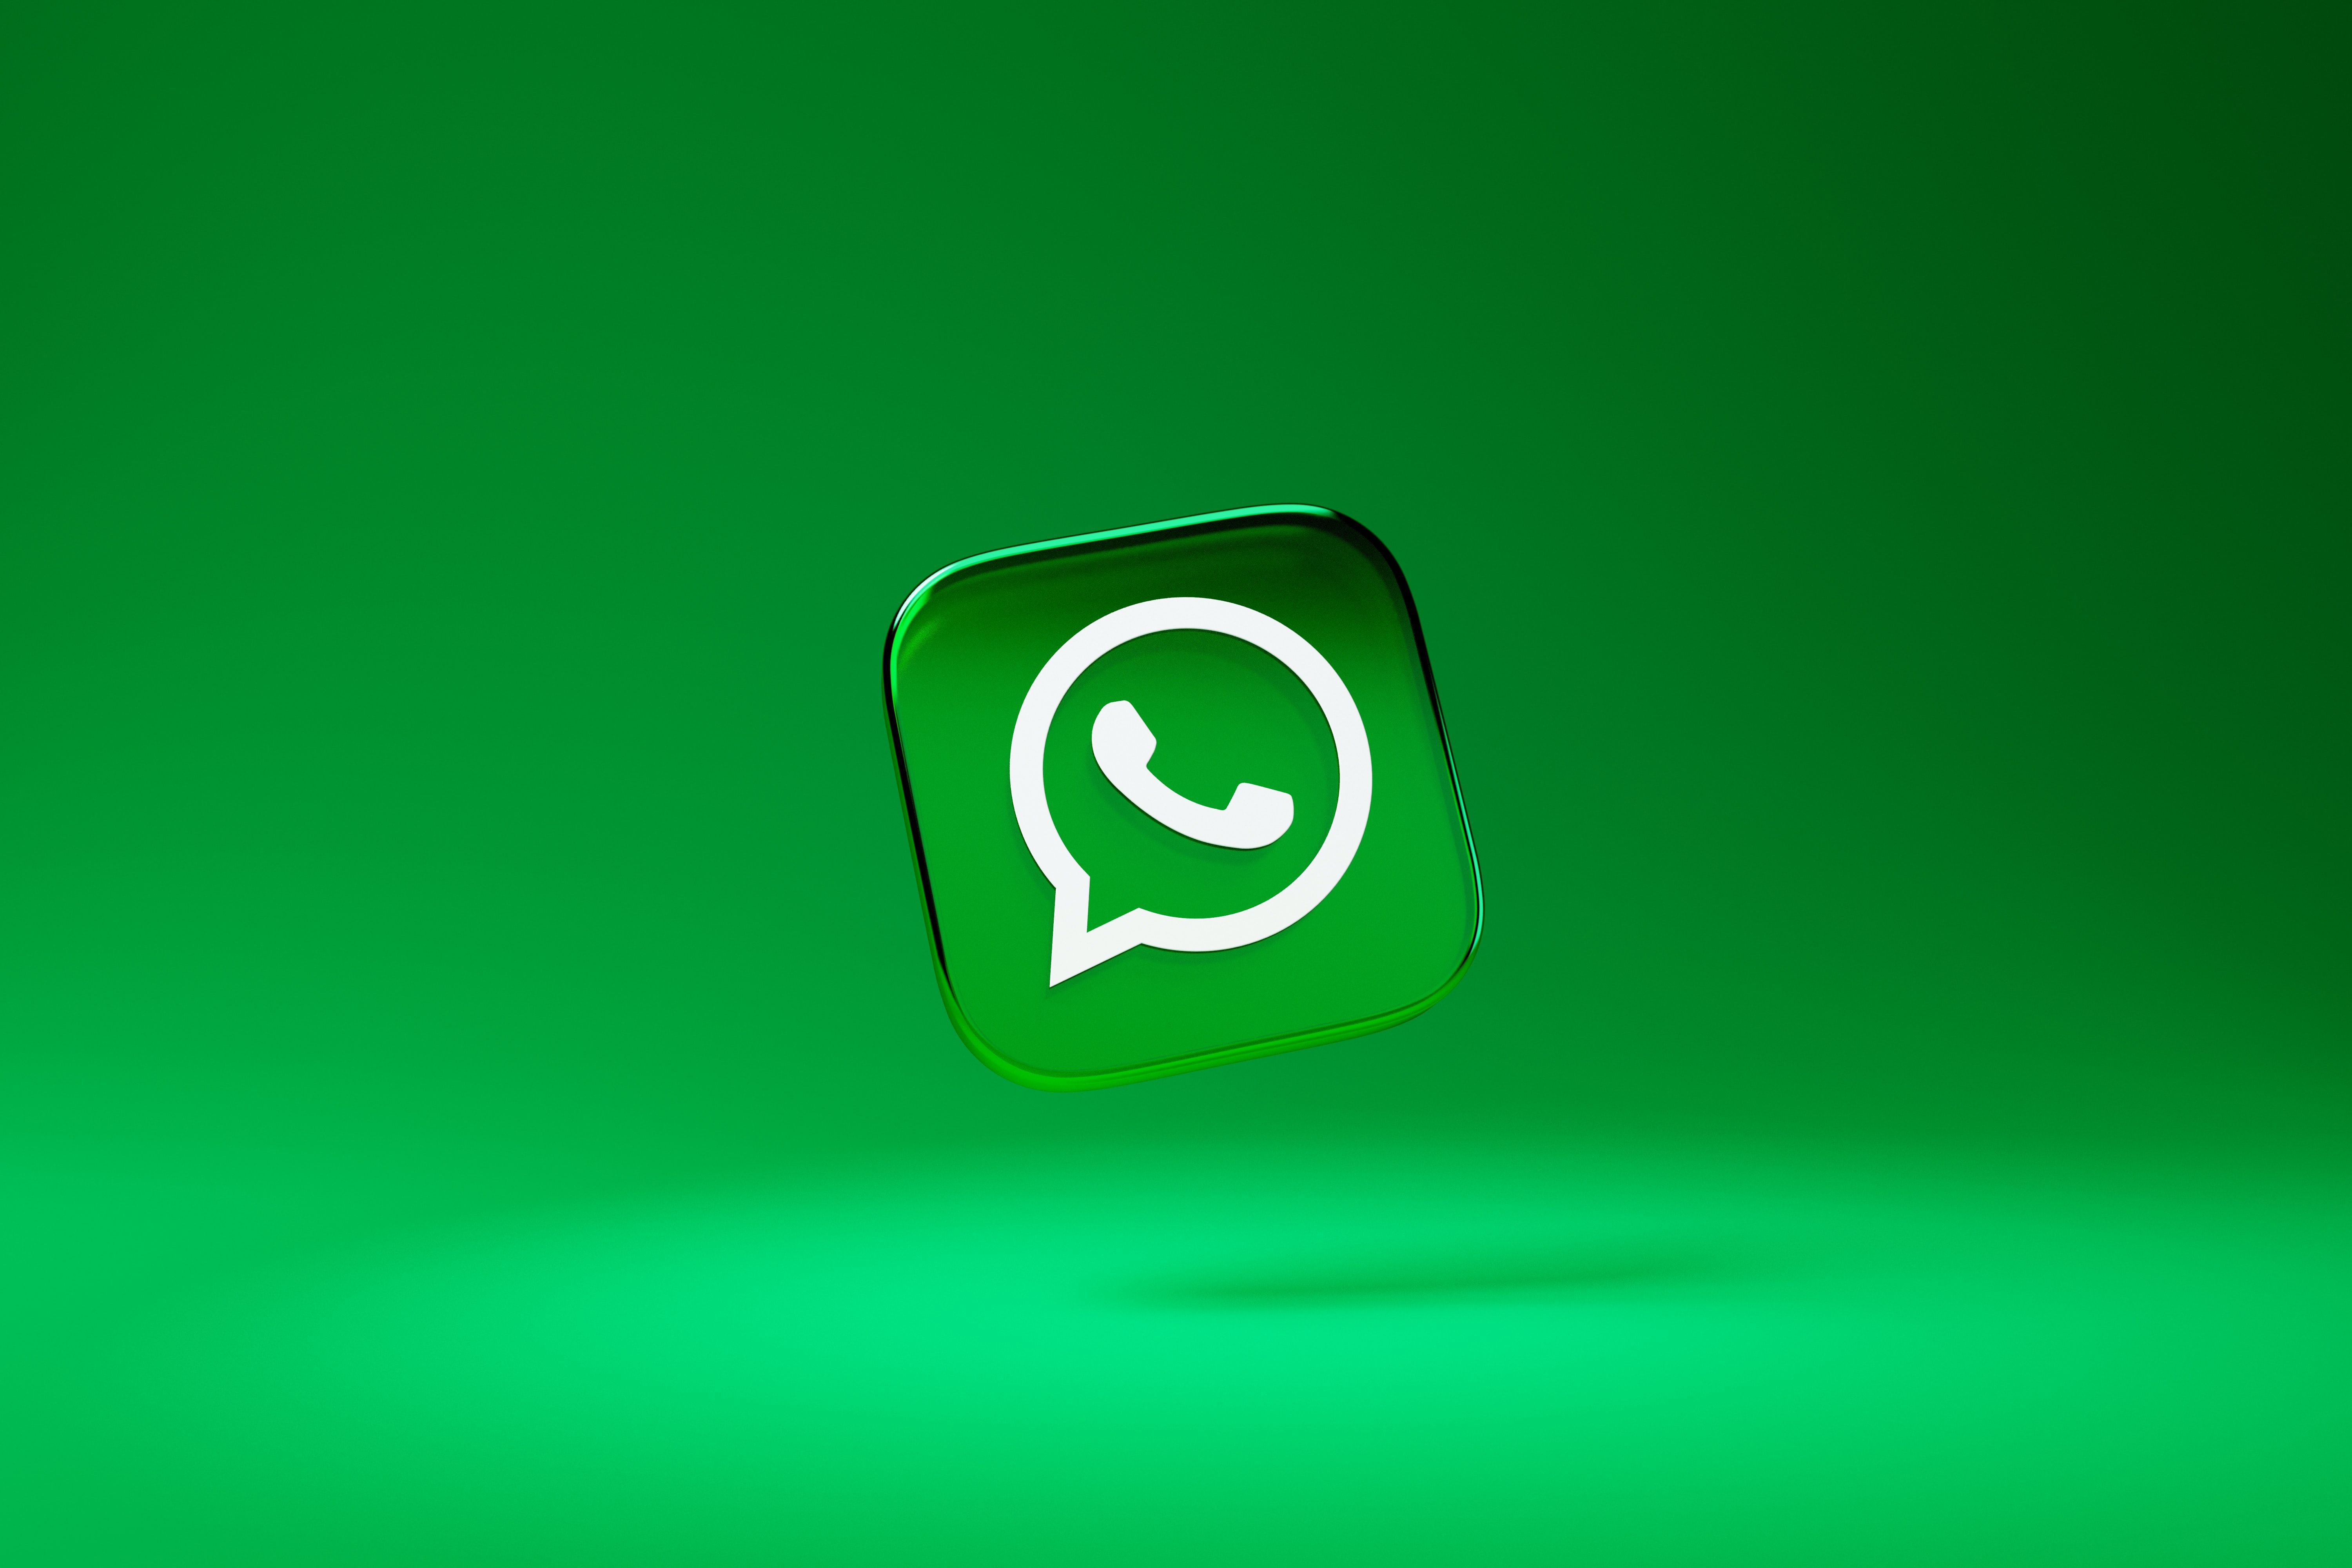 Your WhatsApp group admin will soon be able to delete your messages